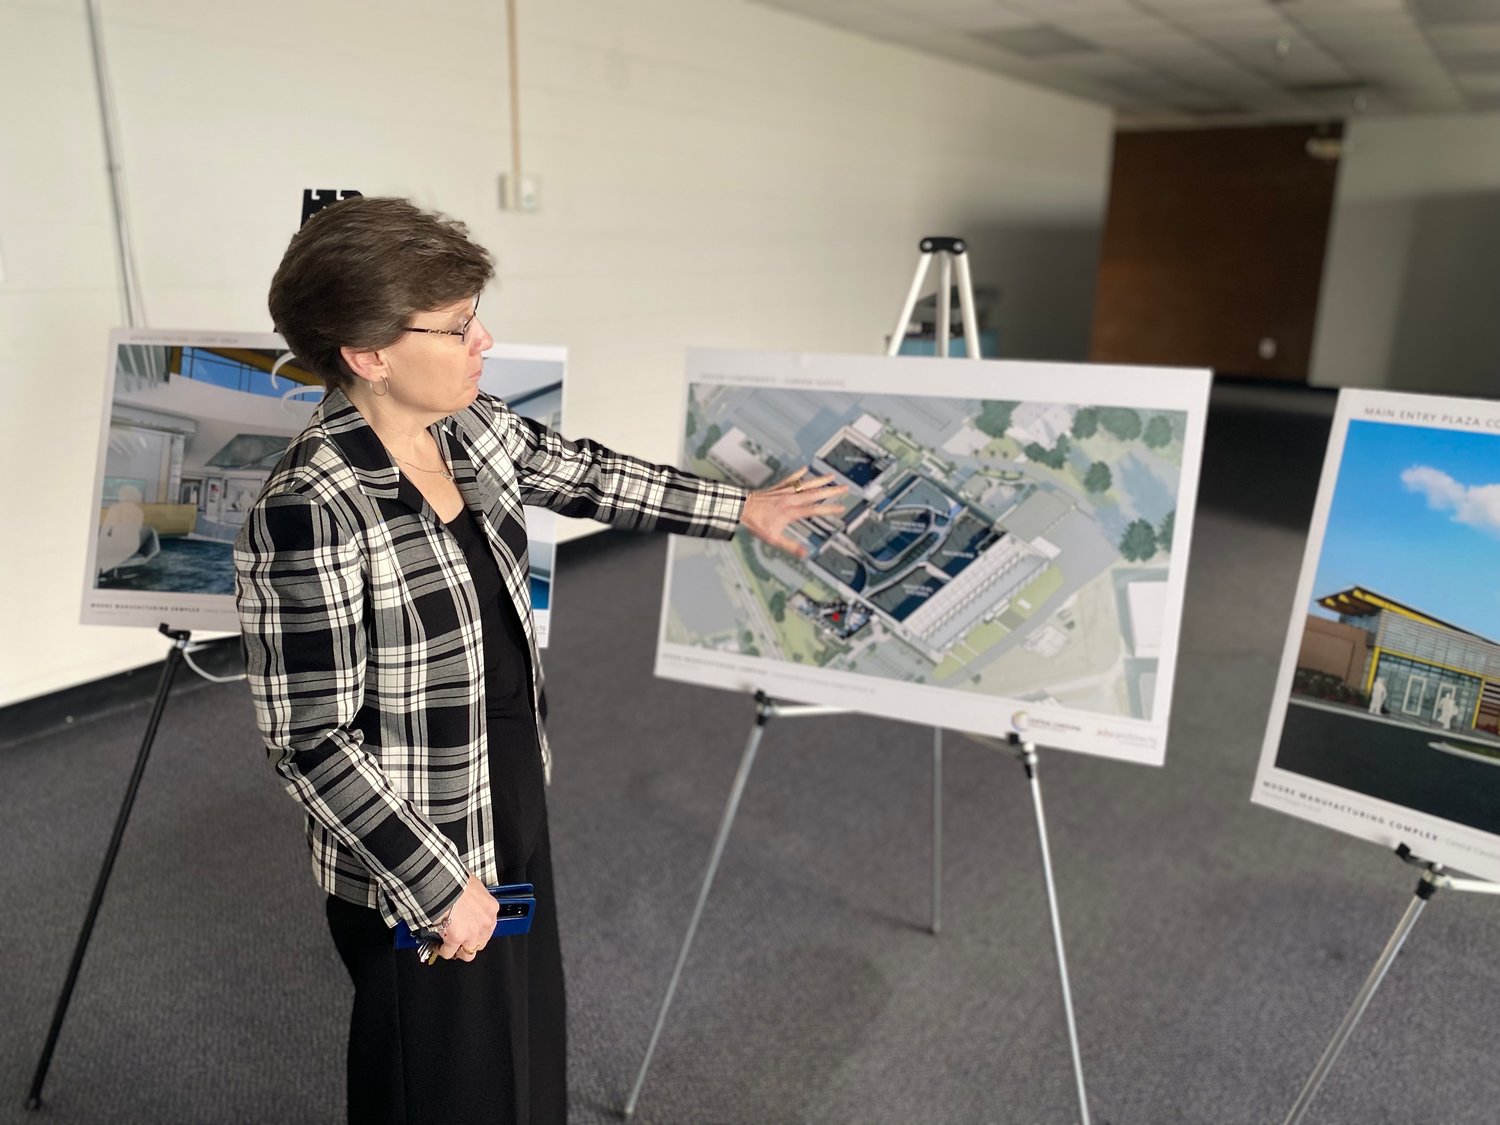 Near the entrance to the former Magneti Marelli facility, CCCC's Margaret Roberton points out a plan to transform the space into a state-of-the-art training and technology center.